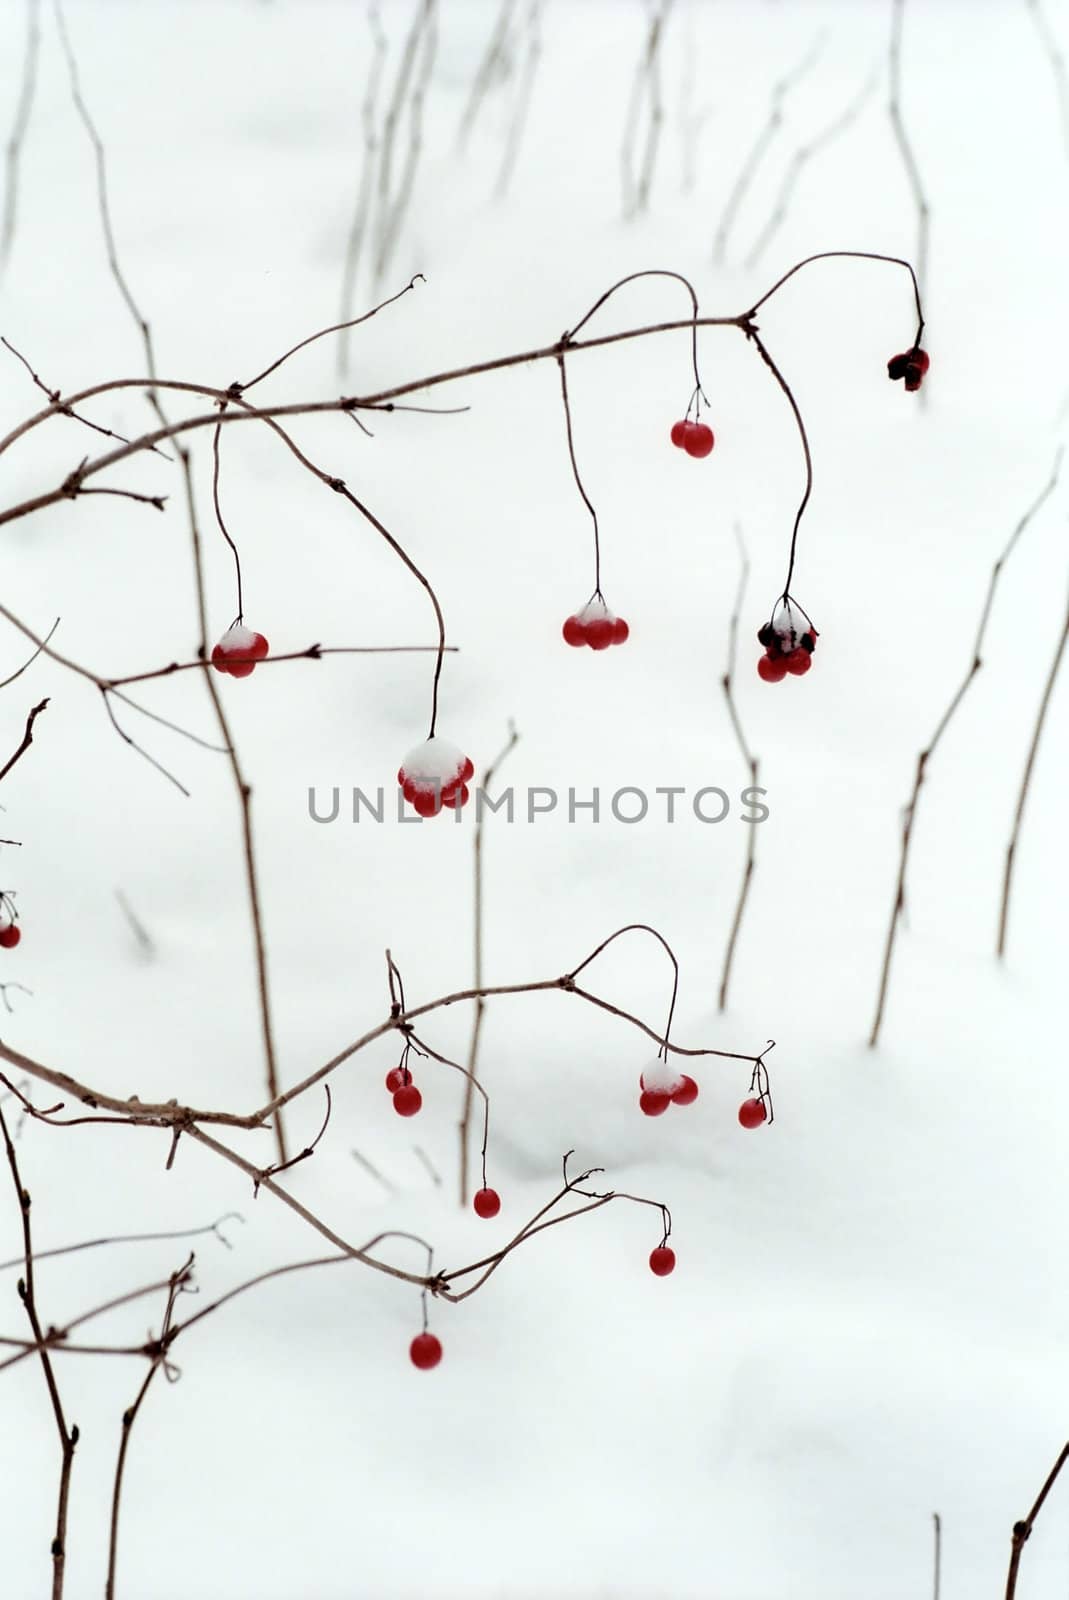 Red berries in winter by mulden